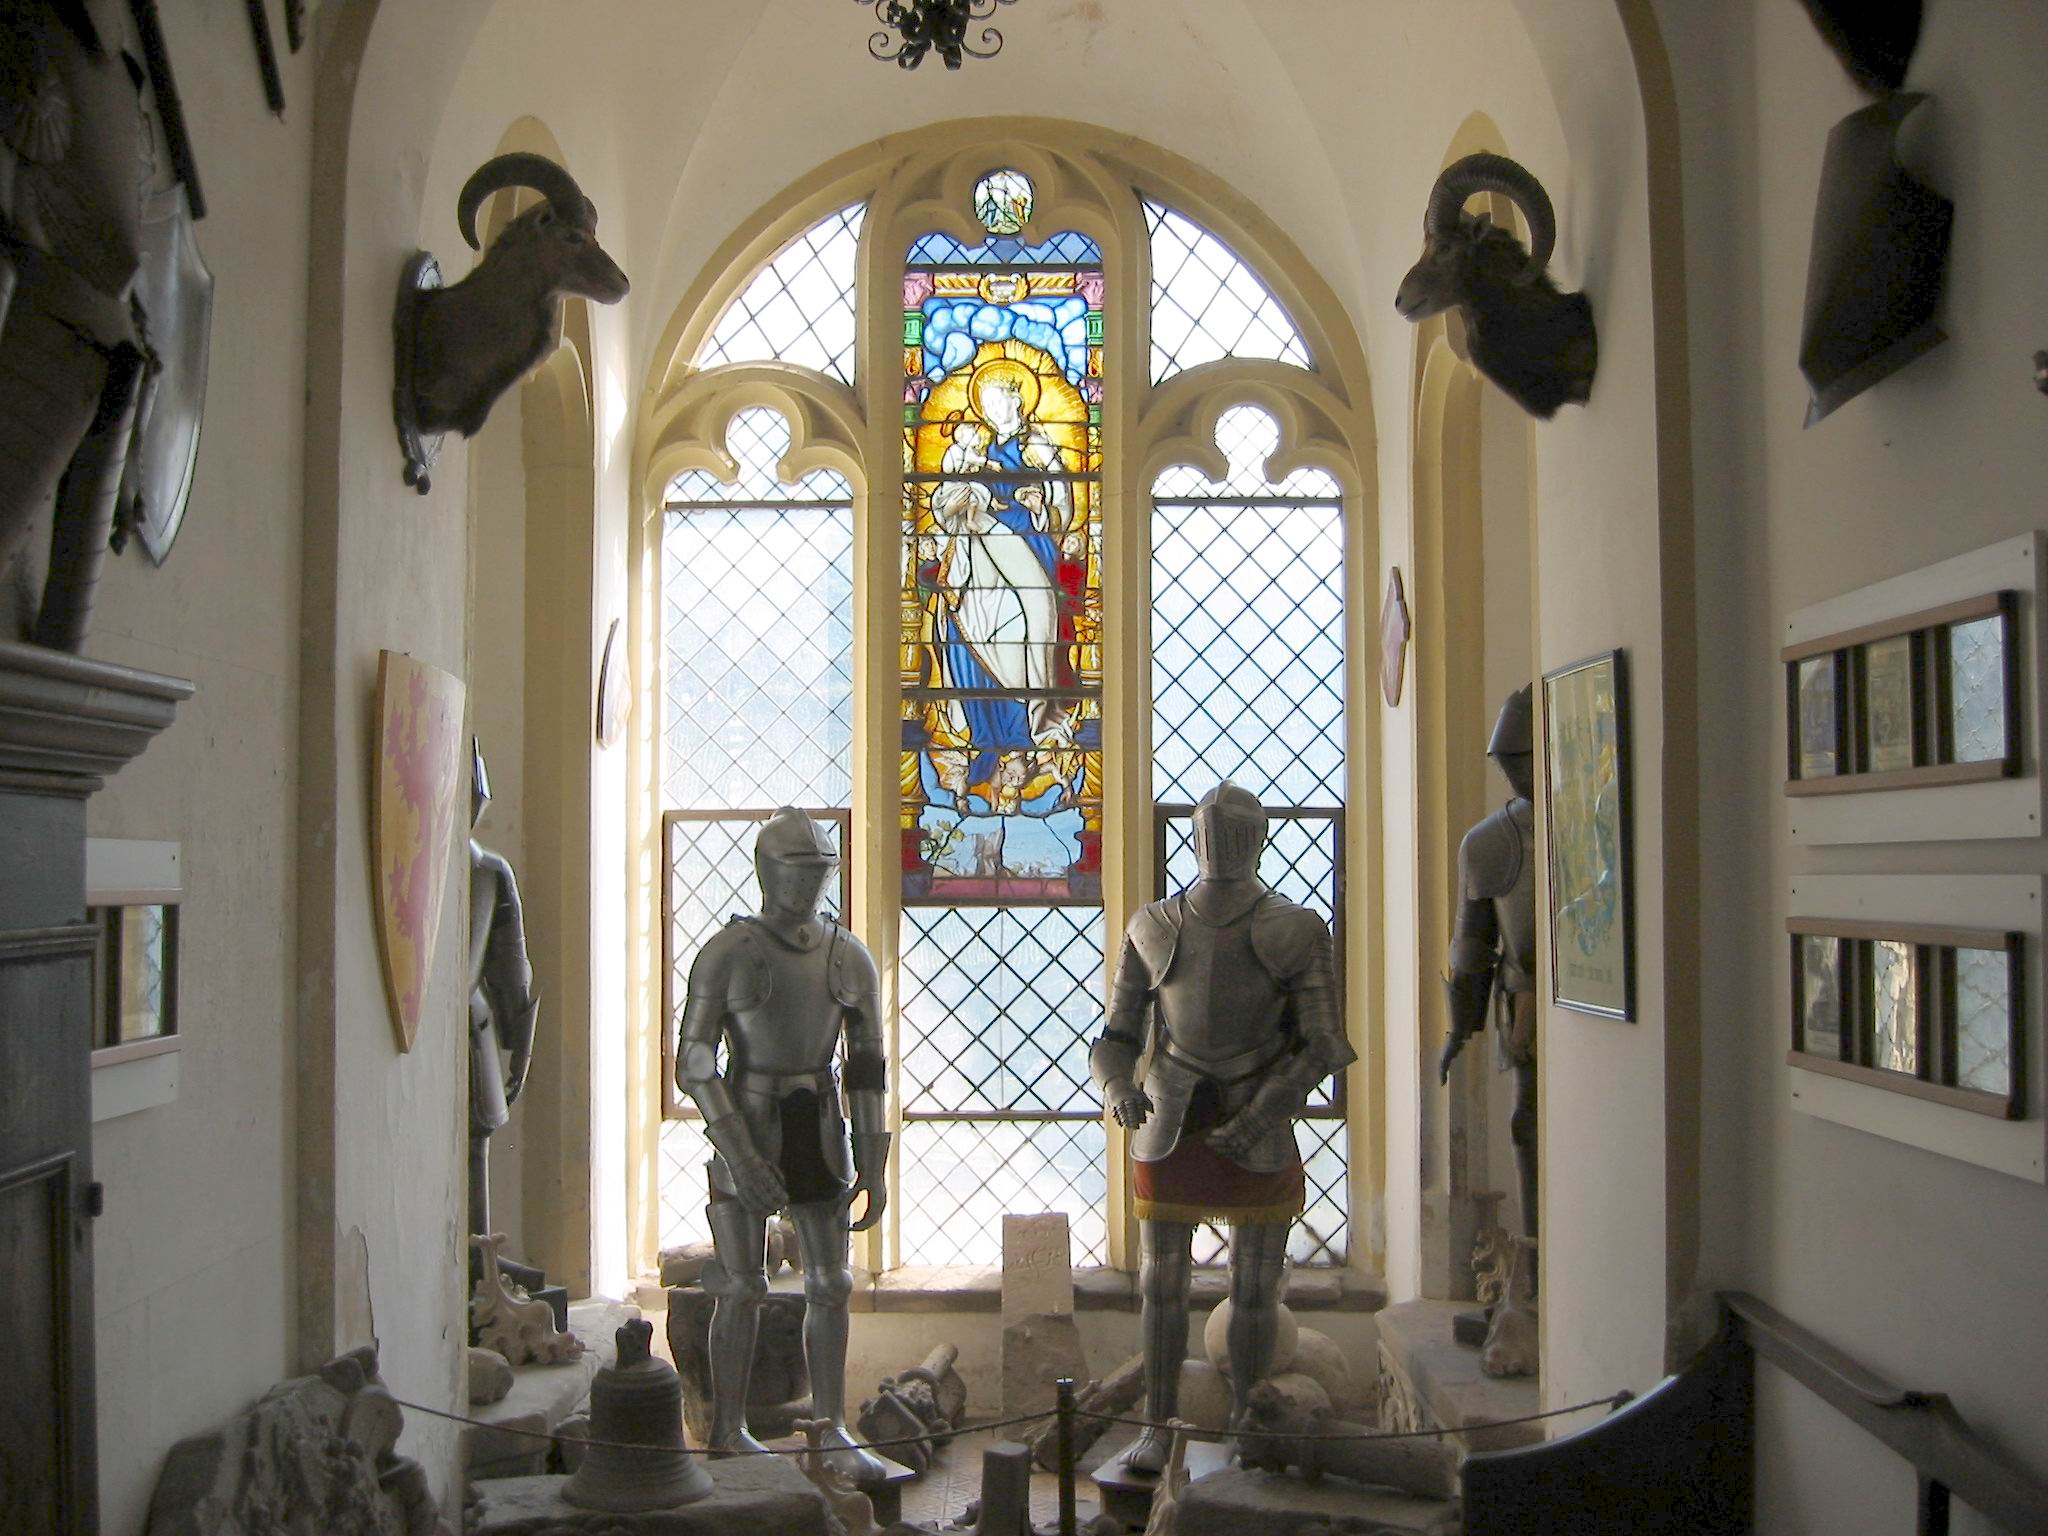 Full suits of armor, and much bric-a-brac in the castle